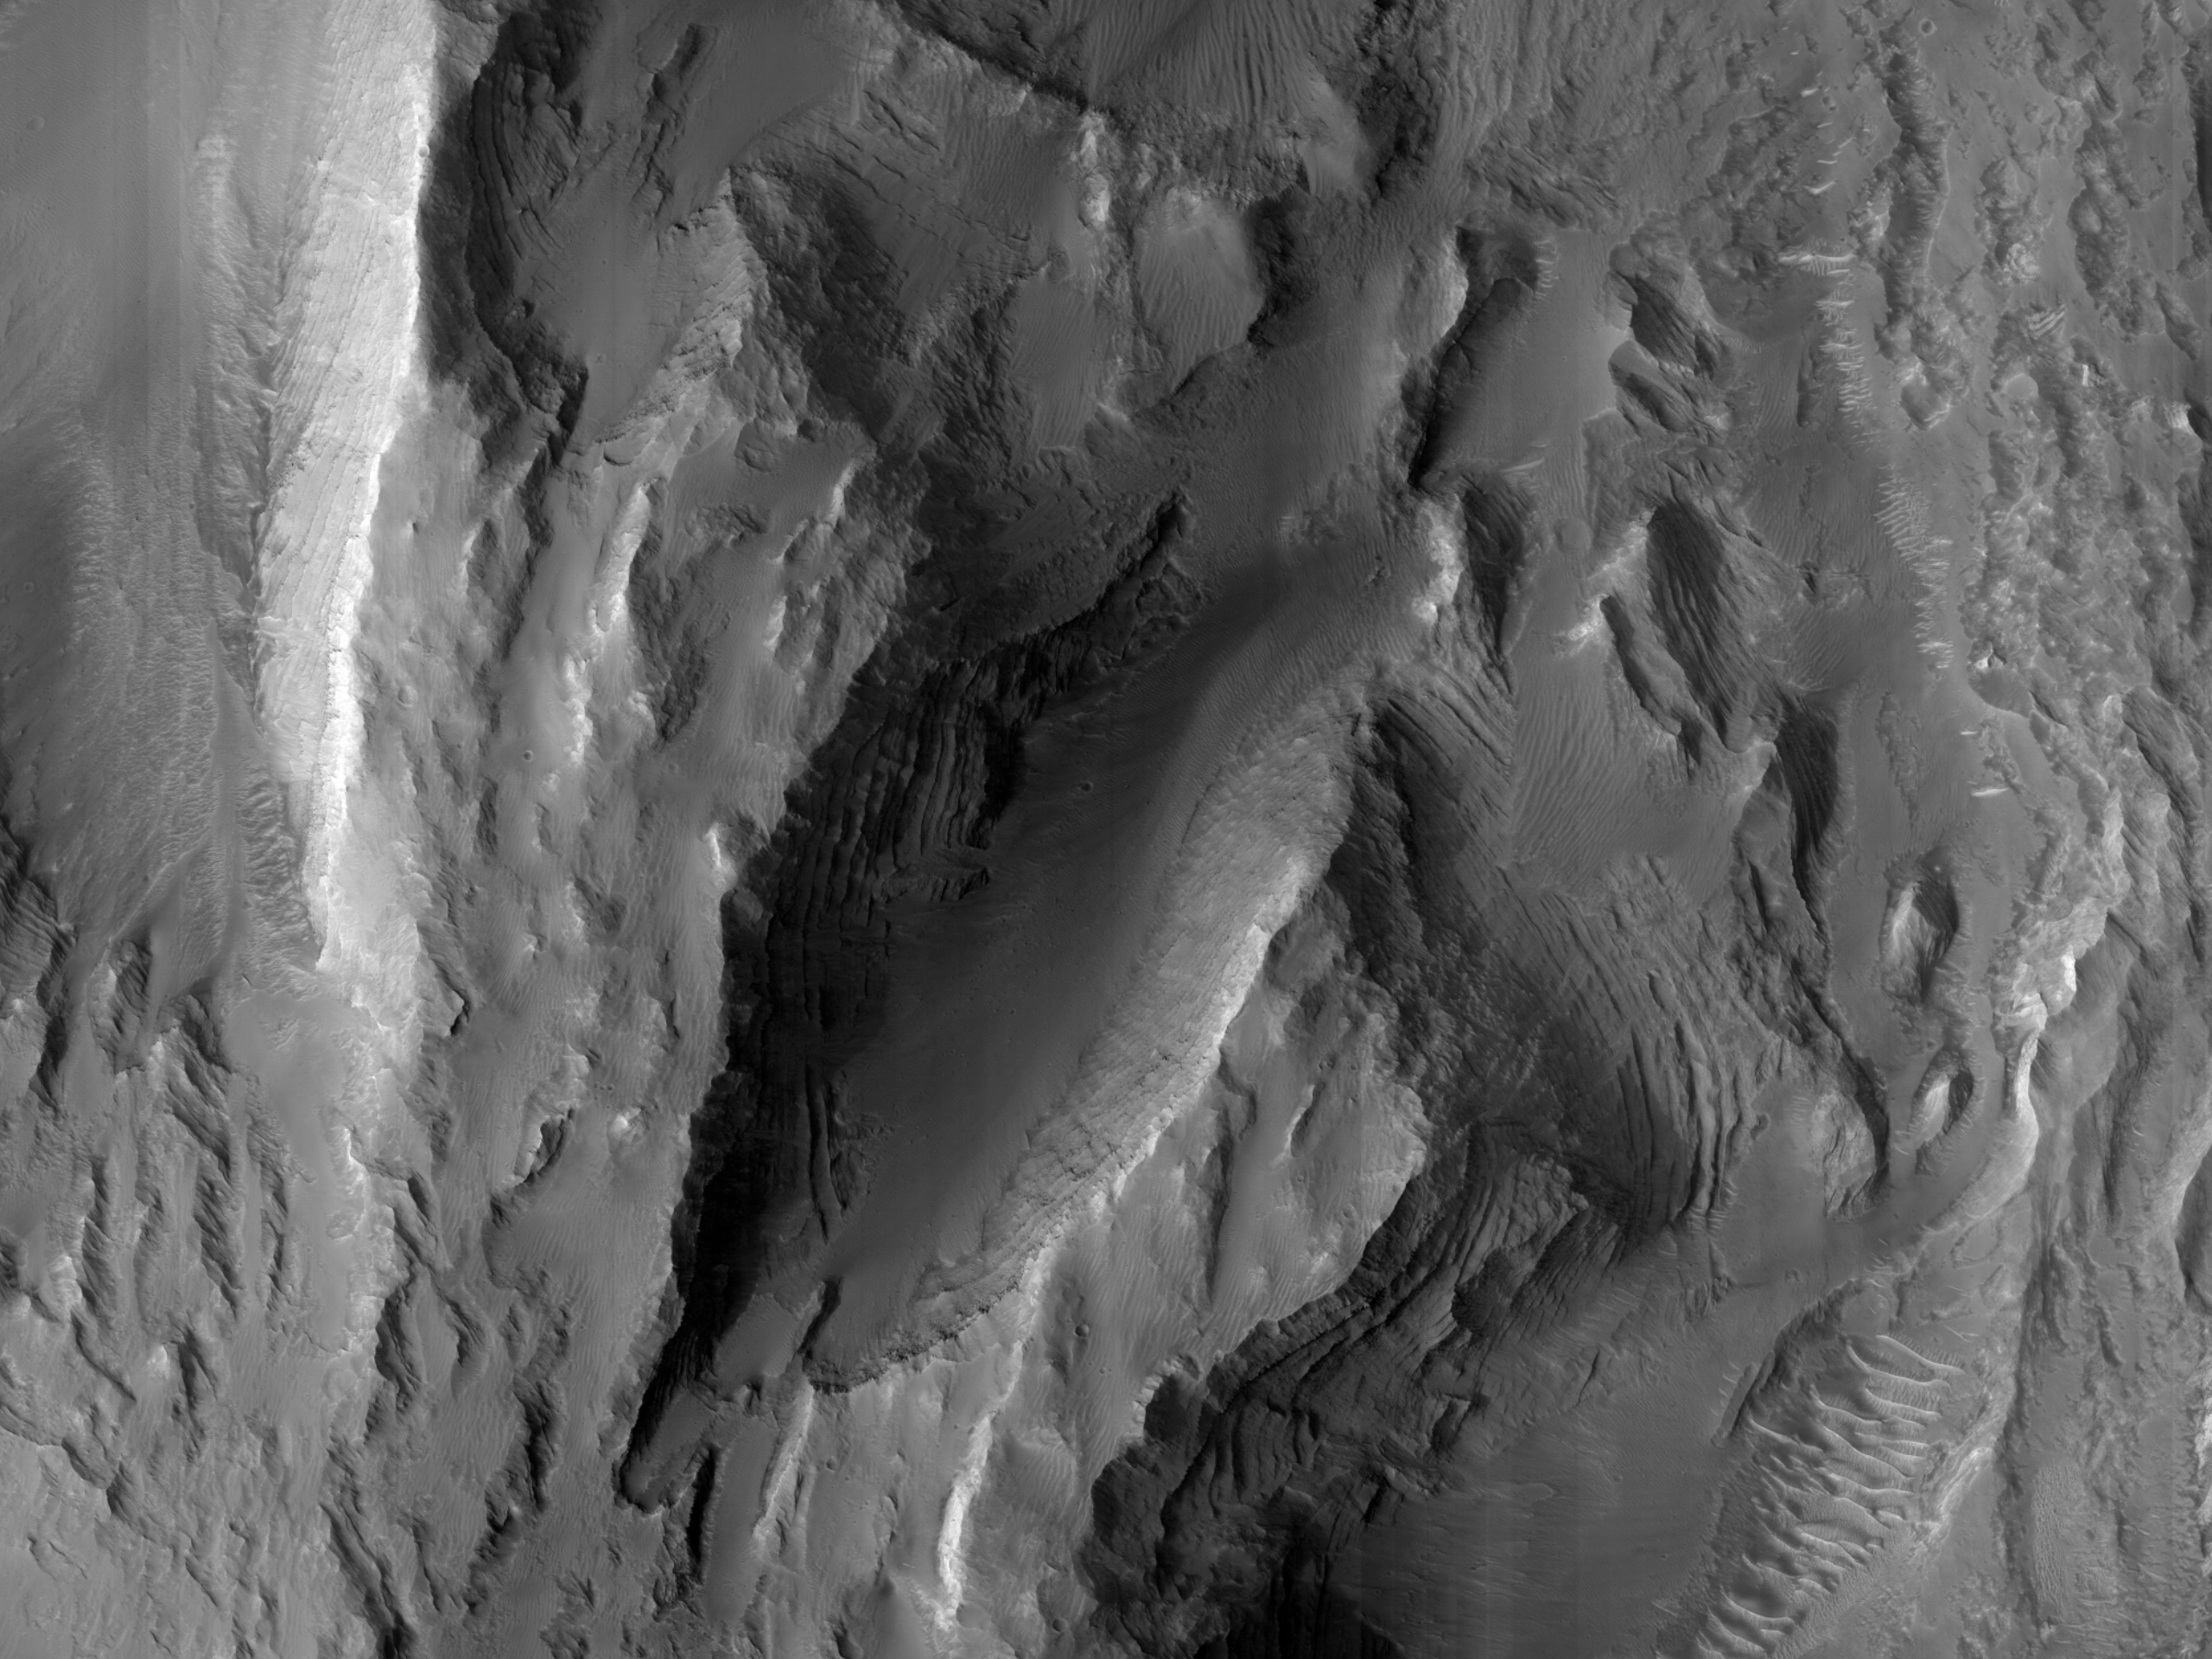 Monitoring Slopes in Gale Crater